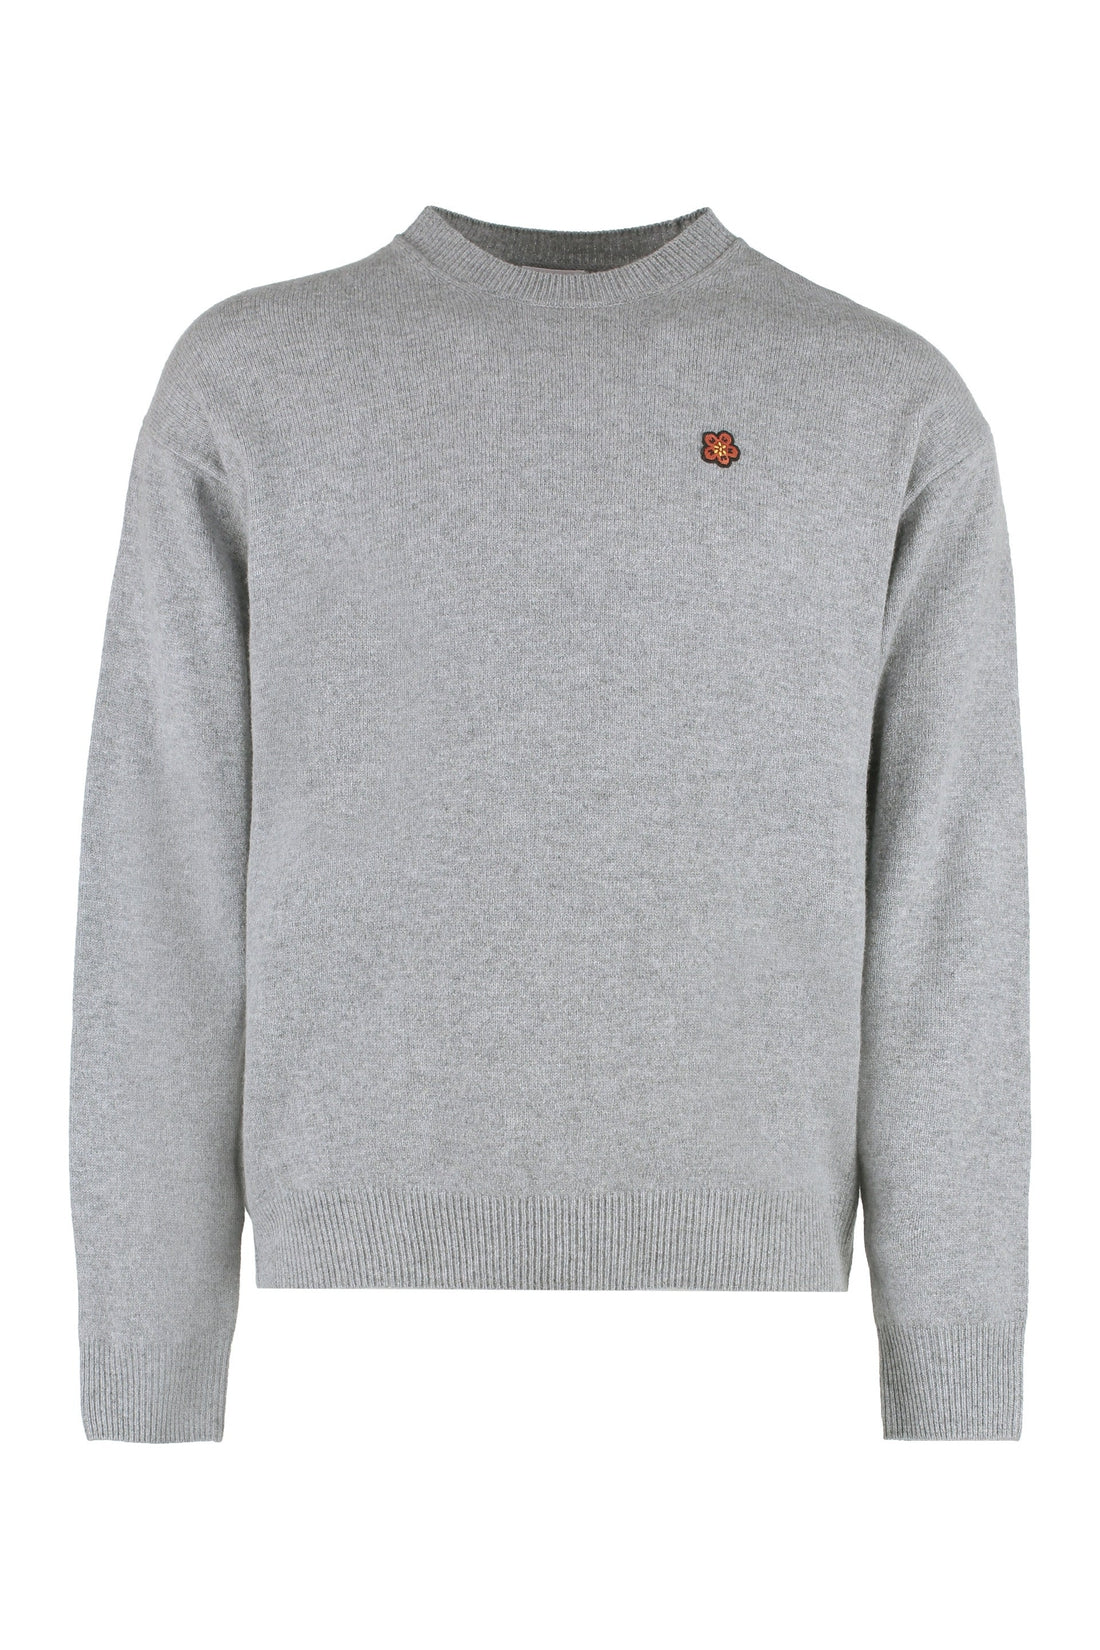 Kenzo-OUTLET-SALE-Wool crew-neck sweater-ARCHIVIST